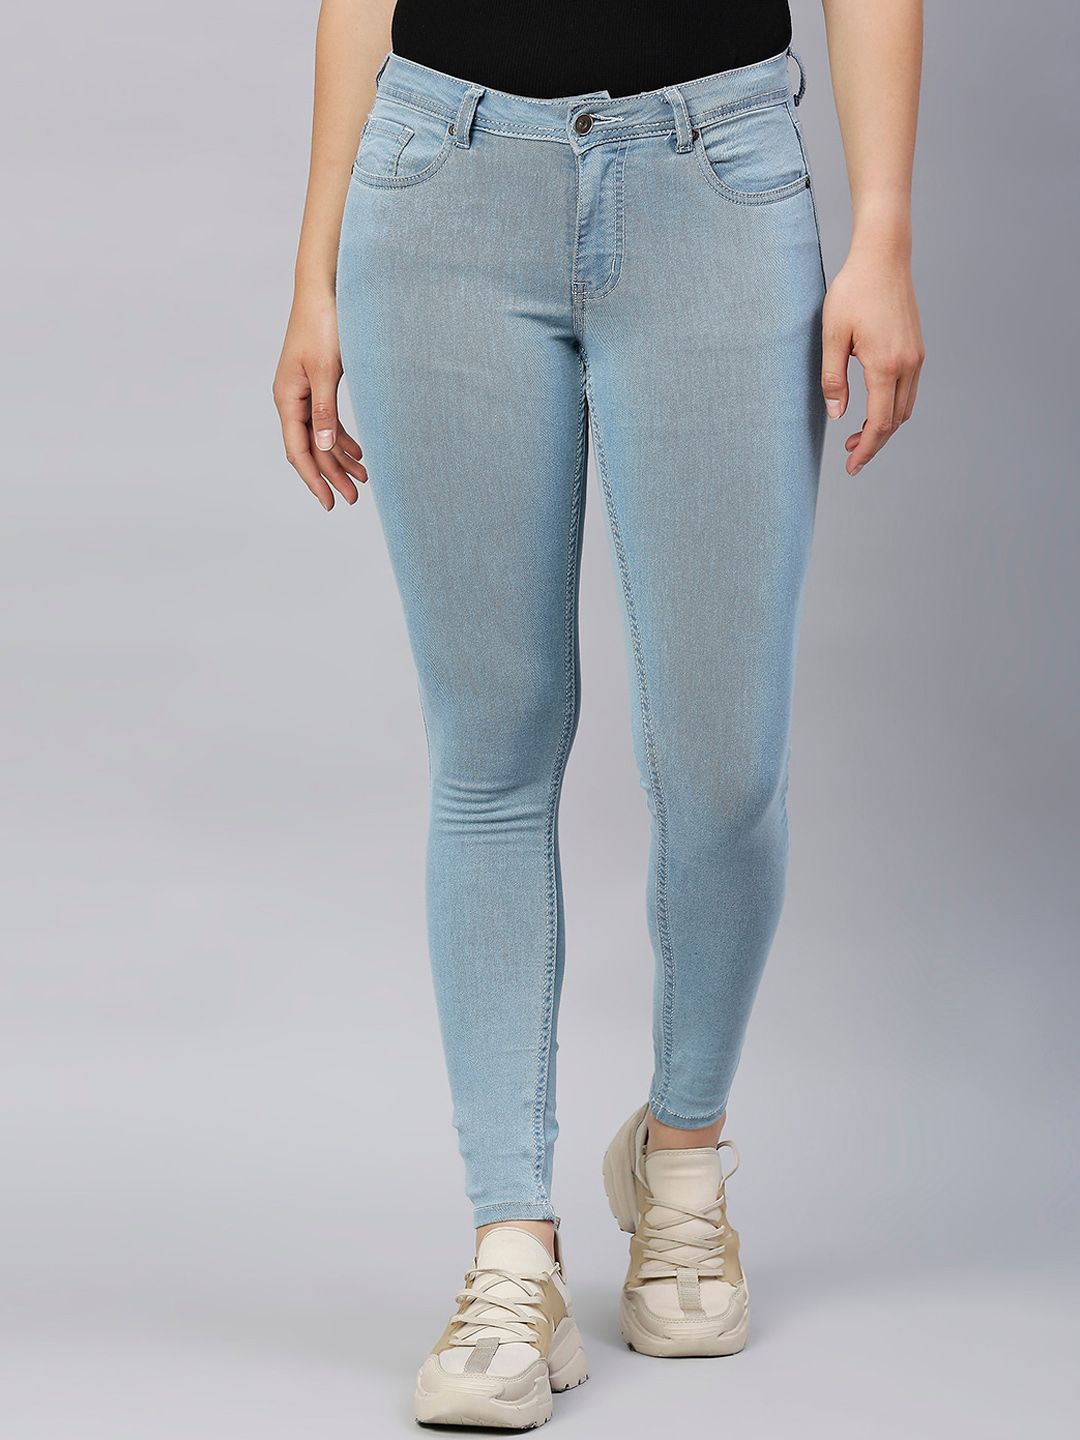 High Star Women Blue Slim Fit Stretchable Jeans Price in India